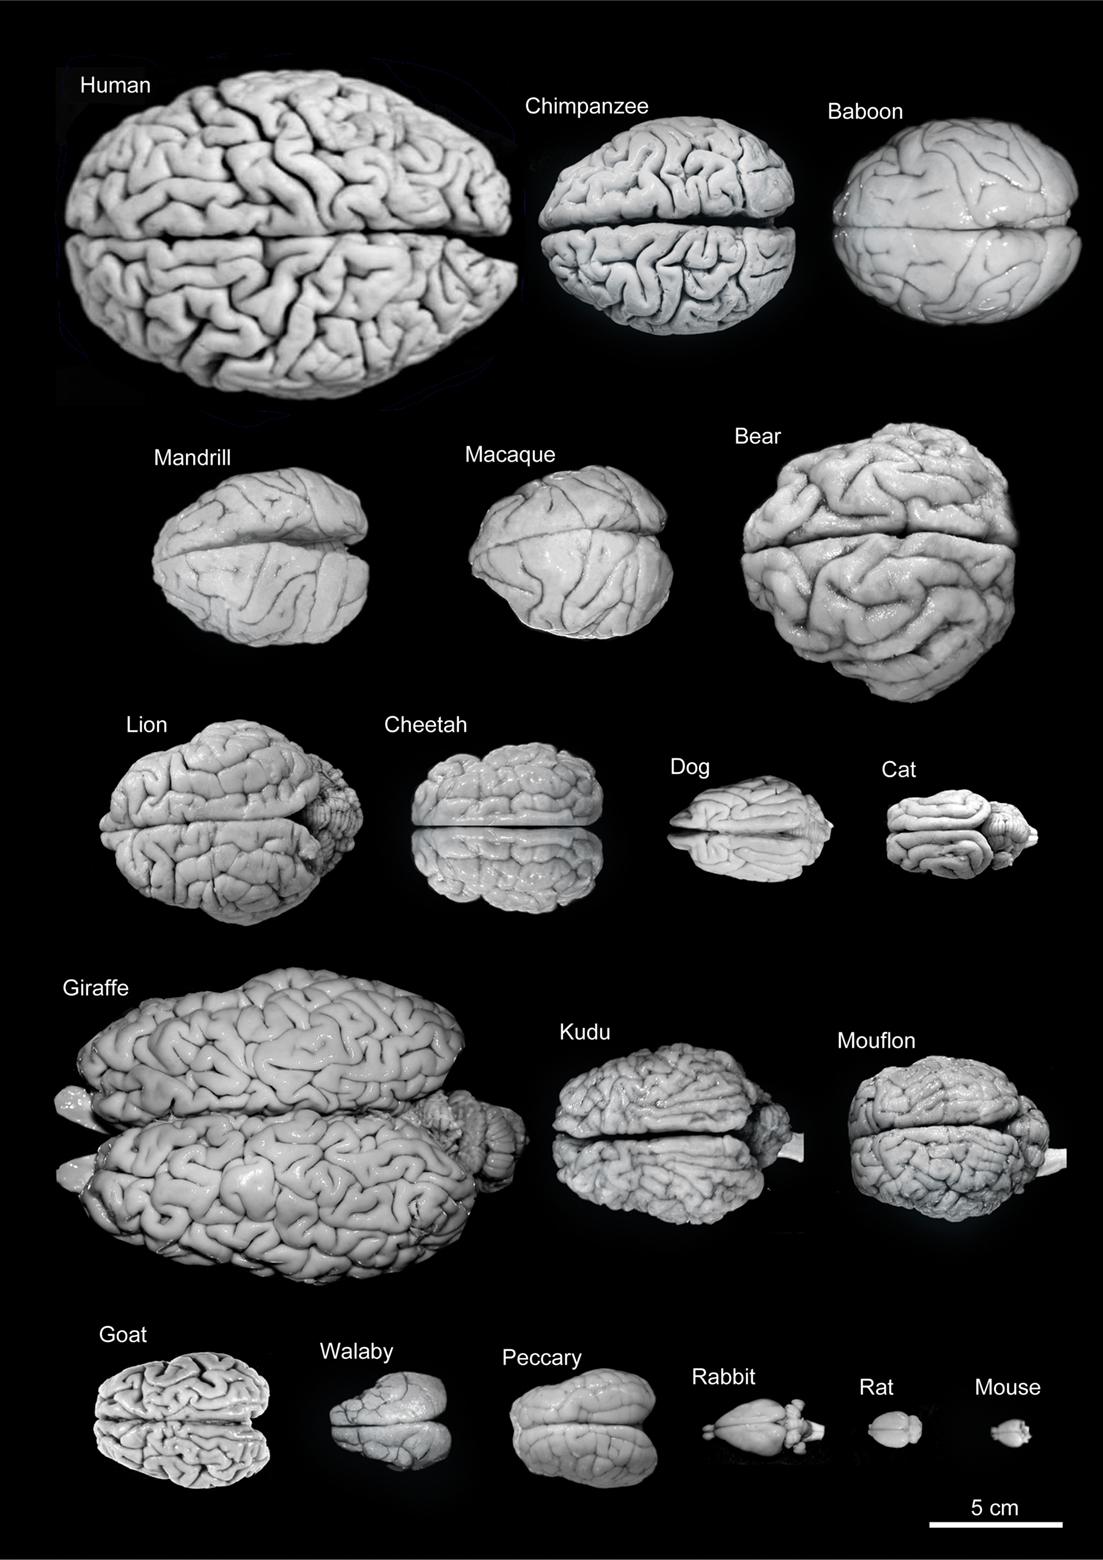 Variability of brain size and external topography. Photographs and weights of the brains of different species. Primates: human (Homo sapiens, 1.176 kg), chimpanzee (Pan troglodytes, 273 g), baboon (Papio cynocephalus, 151 g), mandrill (Mandrillus sphinx, 123 g), macaque (Macaca tonkeana, 110 g). Carnivores: bear (Ursus arctos, 289 g), lion (Panthera leo, 165 g), cheetah (Acinonyx jubatus, 119 g), dog (Canis familiaris, 95 g), cat (Felis catus, 32 g). Artiodactyls: giraffe (Giraffa camelopardalis, 700 g), kudu (Tragelaphus strepsiceros, 166 g), mouflon (Ovis musimon, 118 g), ibex (Capra pyrenaica, 115 g); peccary (Tayassu pecari, 41 g). Marsupials: wallaby (Protemnodon rufogrisea, 28 g). Lagomorphs: rabbit (Oryctolagus cuniculus, 5.2 g). Rodents: rat (Rattus rattus, 2.6 g), mouse (Mus musculus, 0.5 g). The chimpanzee brain was kindly supplied by Dr. Dean Falk. The rest of non-human brains were from material used in Ballesteros-Yánez et al., 2005). Scale bar: 5 cm. From DeFelipe J (2011) The evolution of the brain, the human nature of cortical circuits, and intellectual creativity. Front. Neuroanat. 5:29